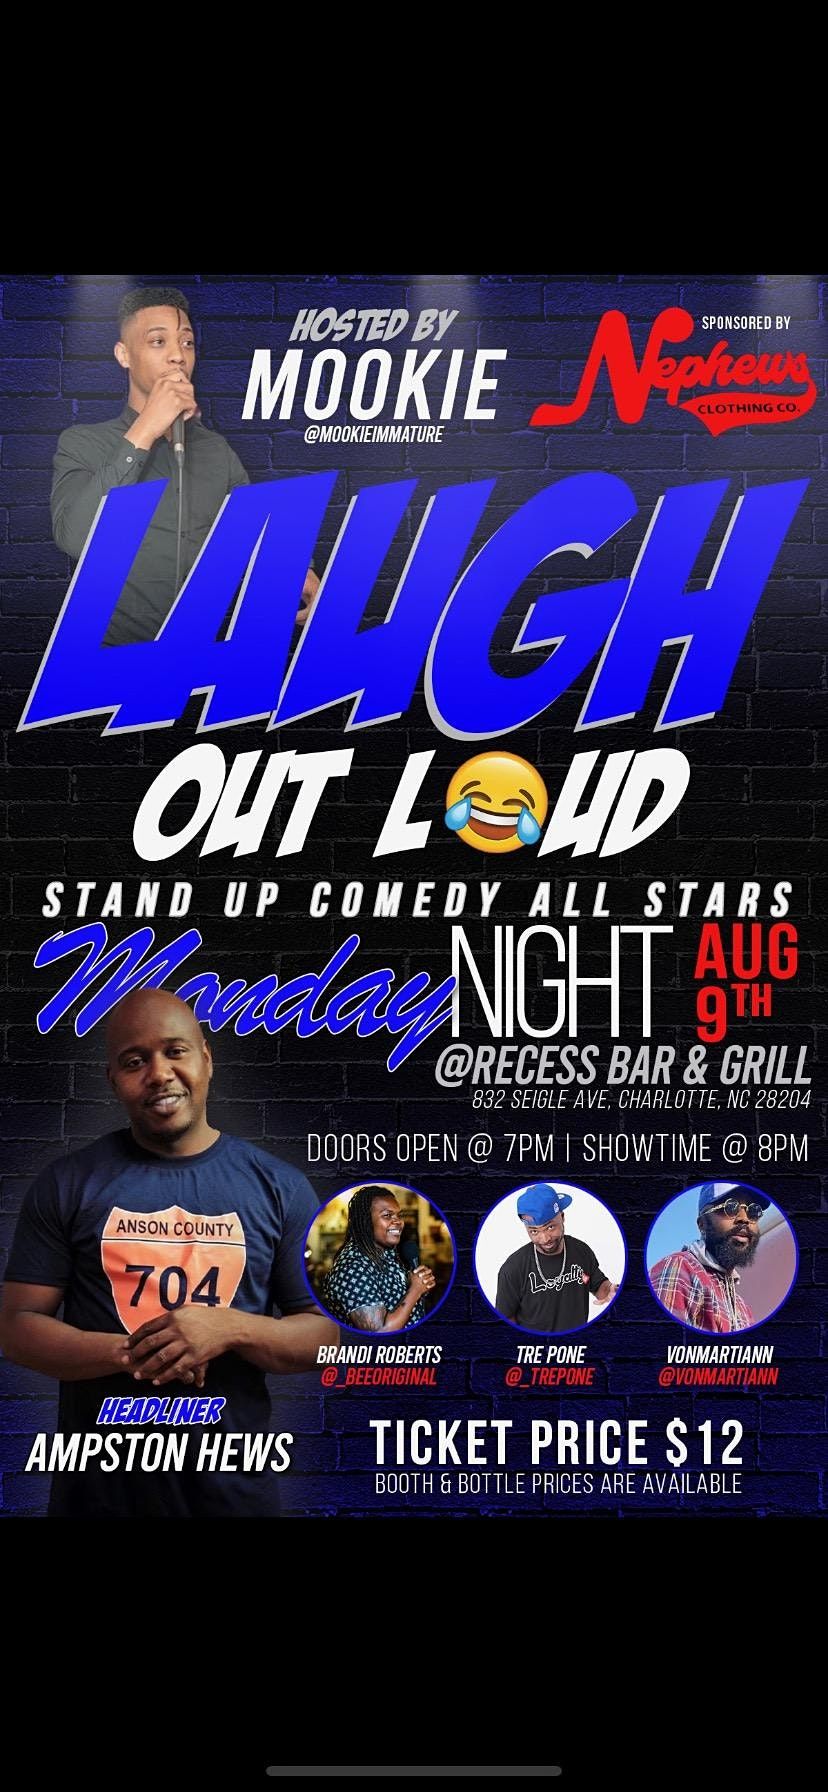 Laugh Out Loud Comedy Series feat @MookieImmature